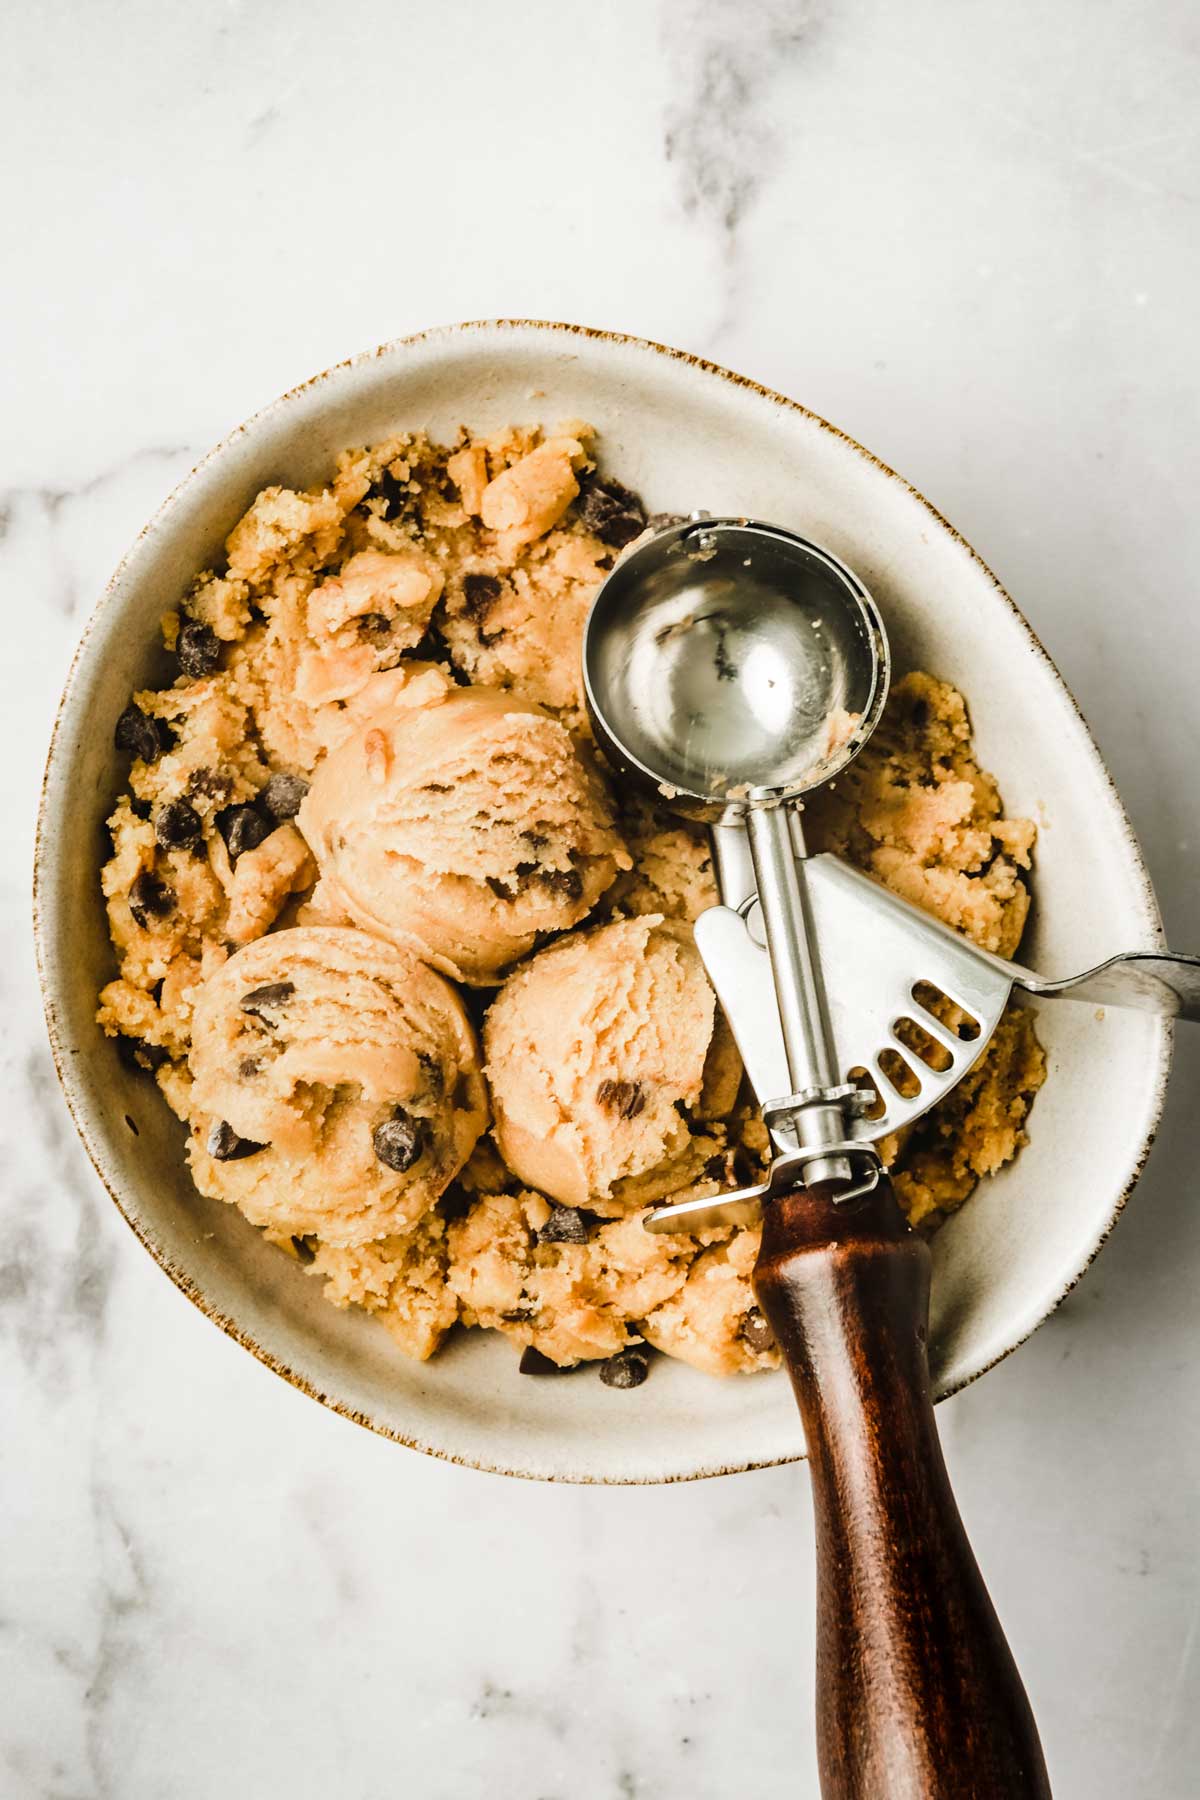 Bowl with ice cream scoop and cookie dough